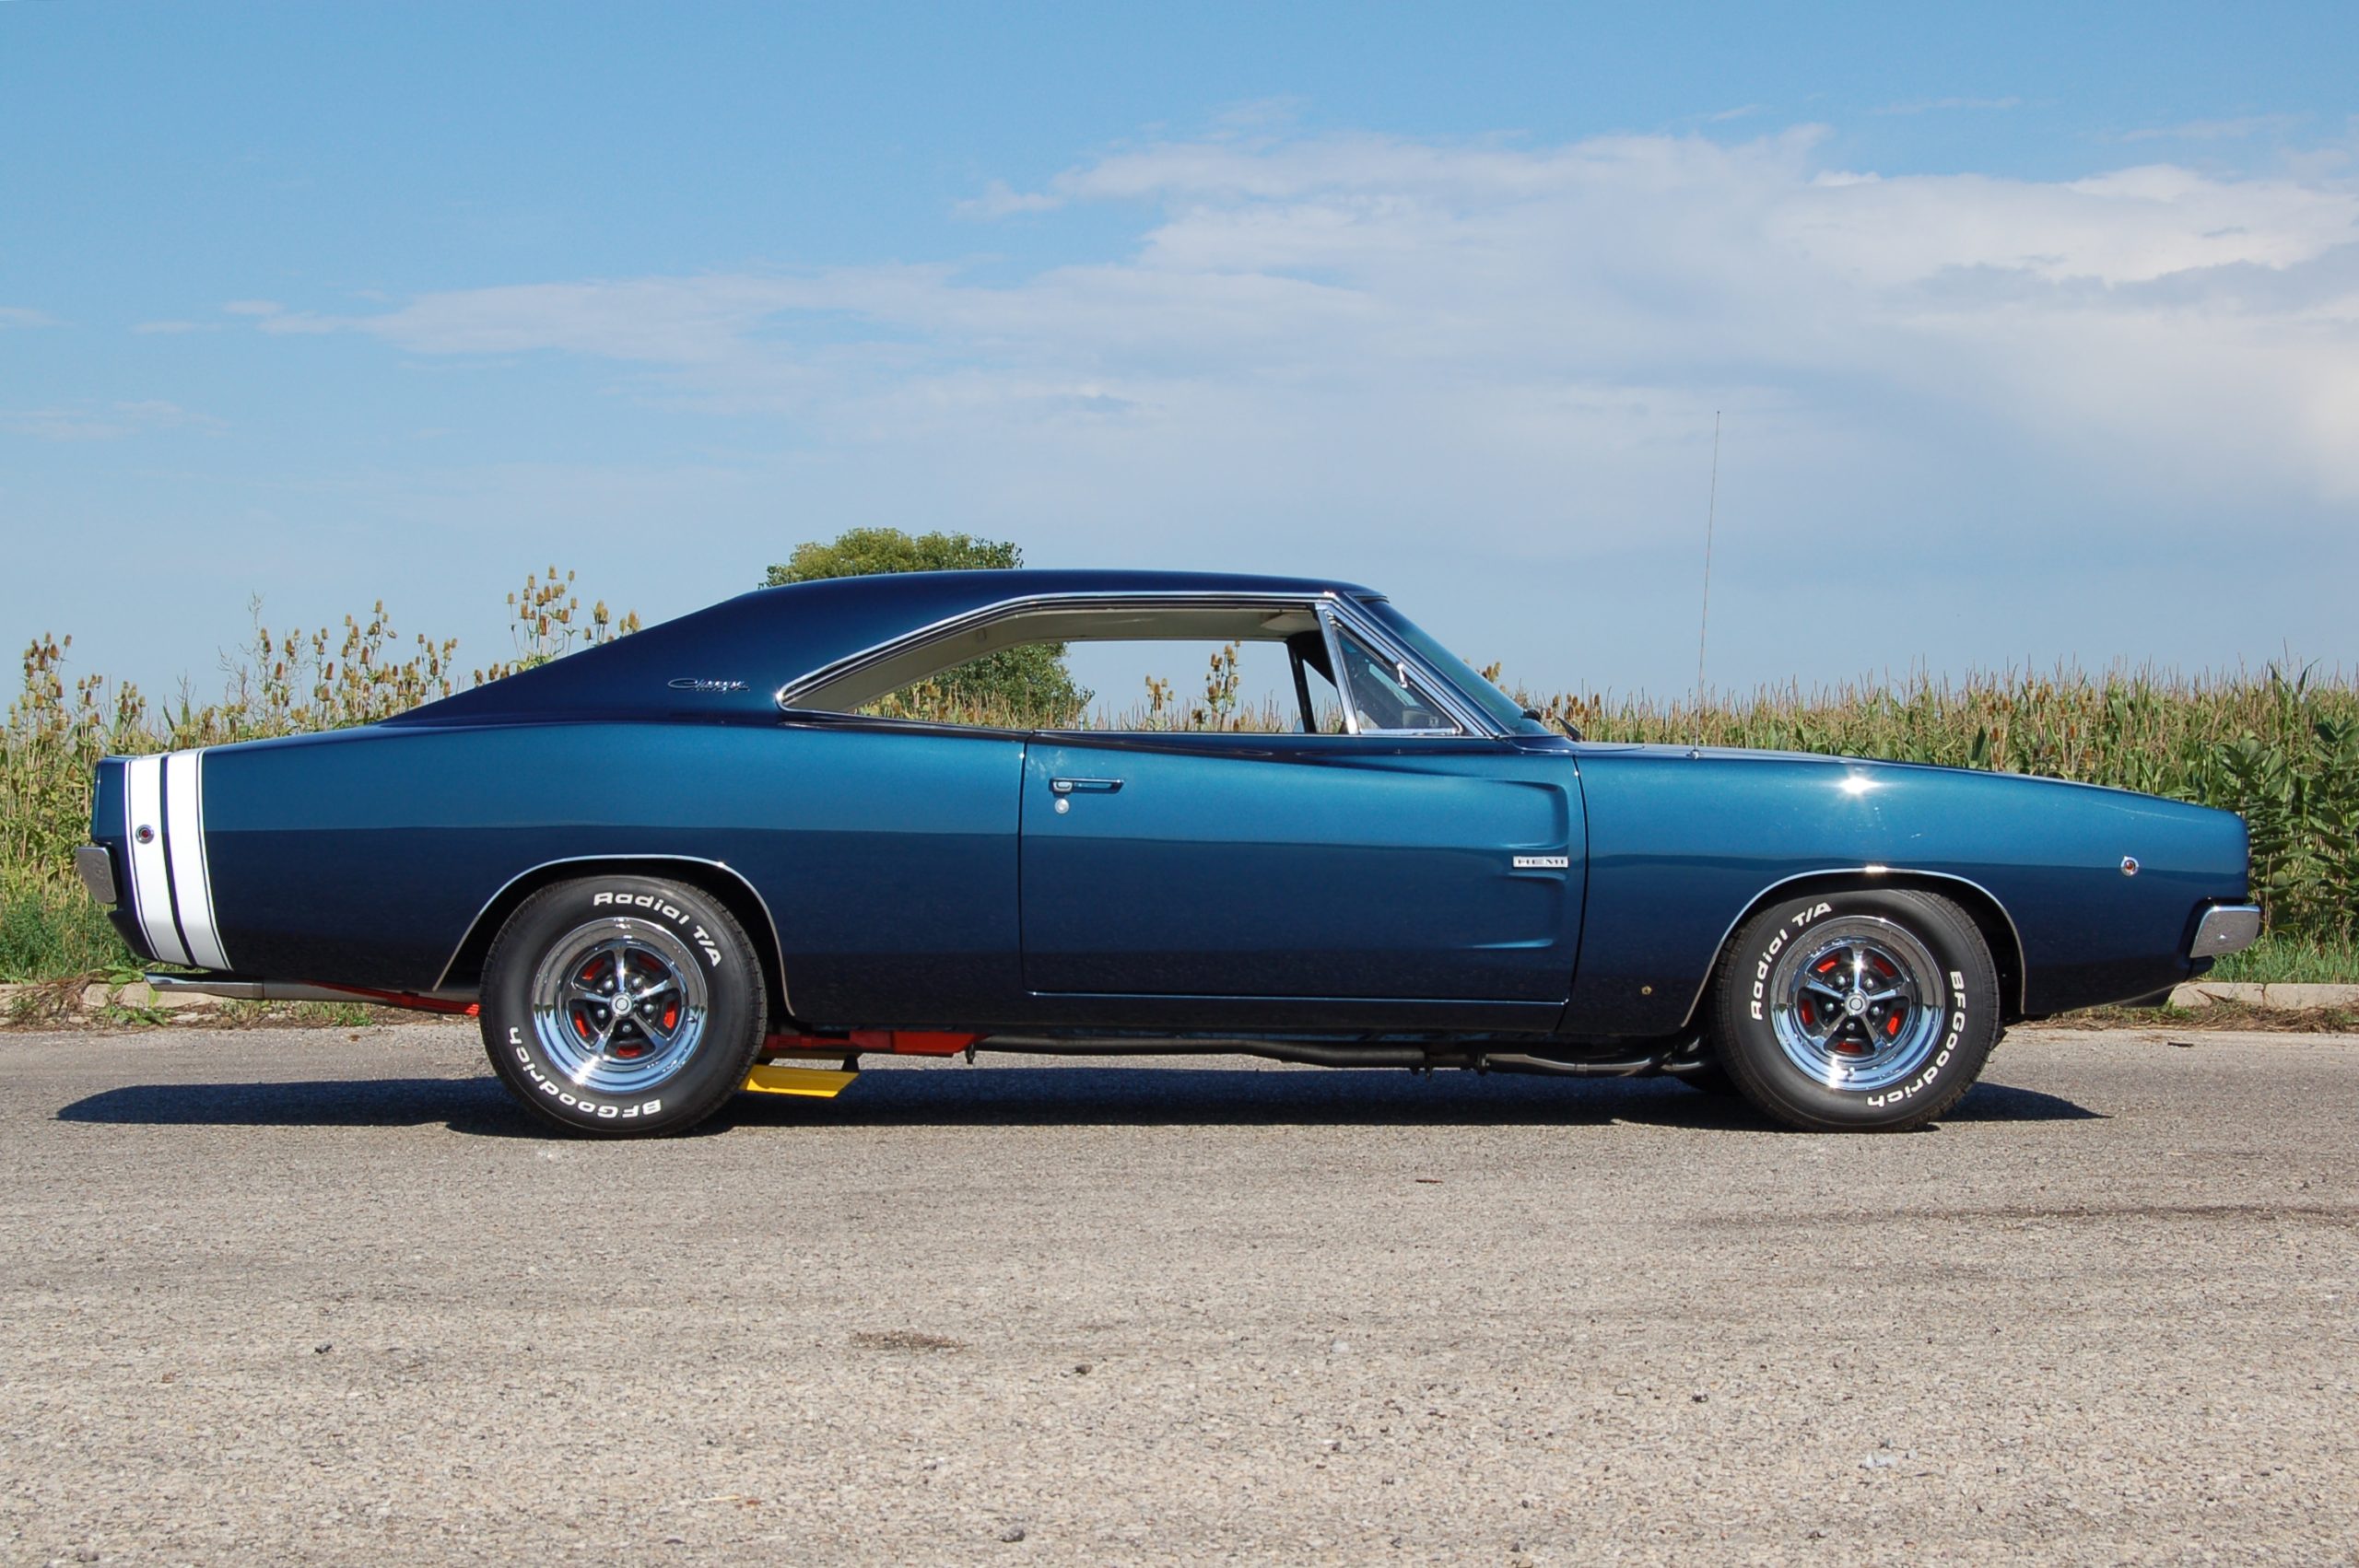 1968 Dodge Charger 426 Hemi For Sale